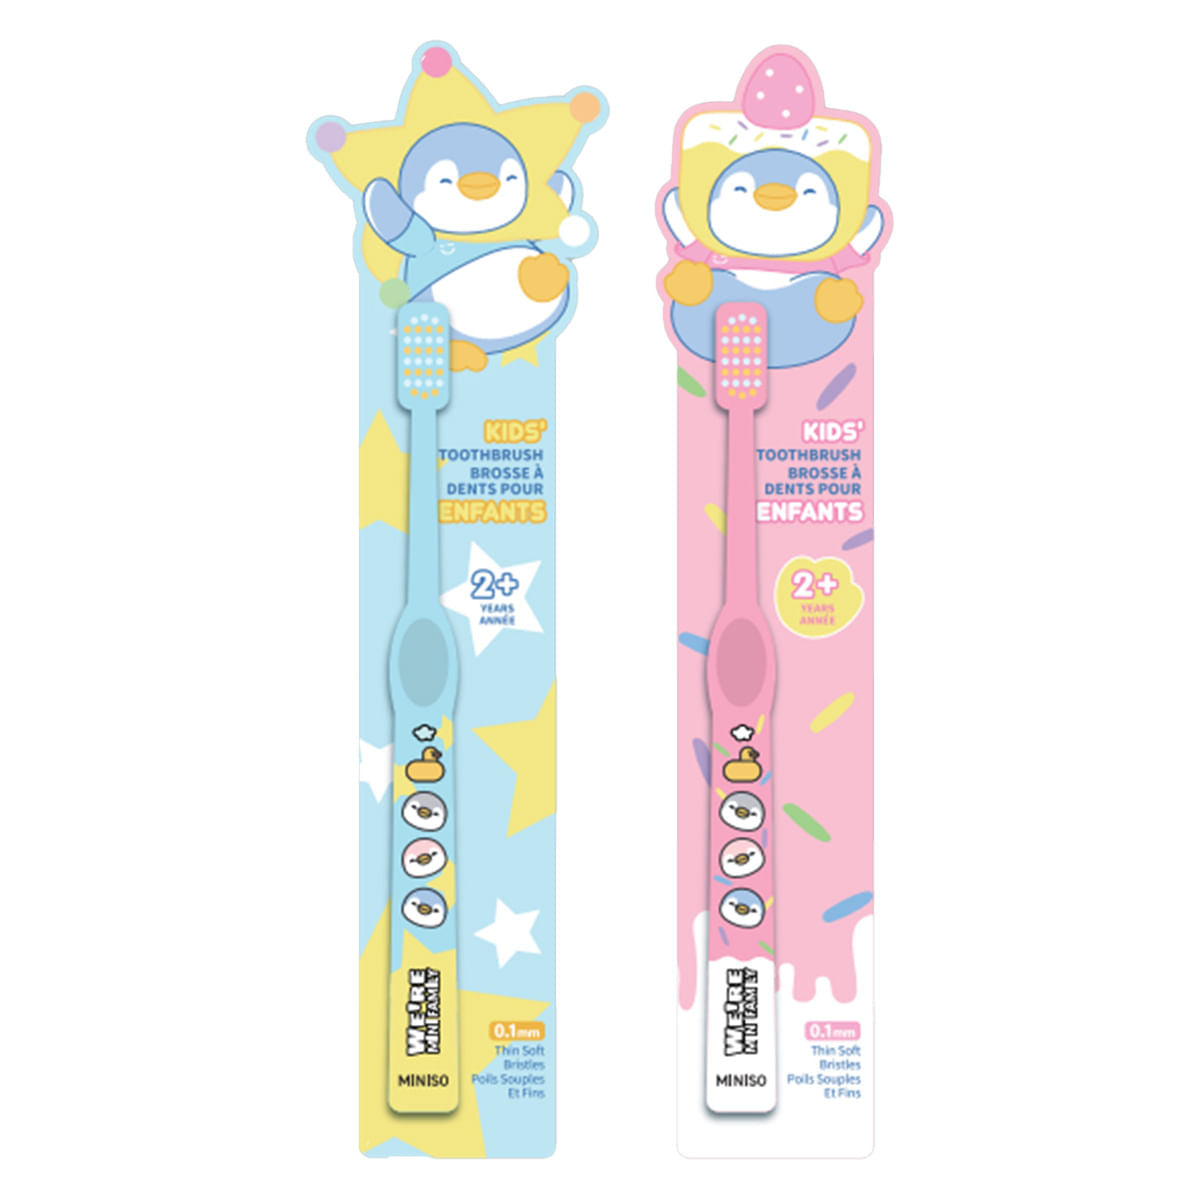 MINISO PENPEN DAILY SOFT BRISTLES KIDS' TOOTHBRUSH ( 1 COUNT ) 2016197410100 TOOTHBRUSH